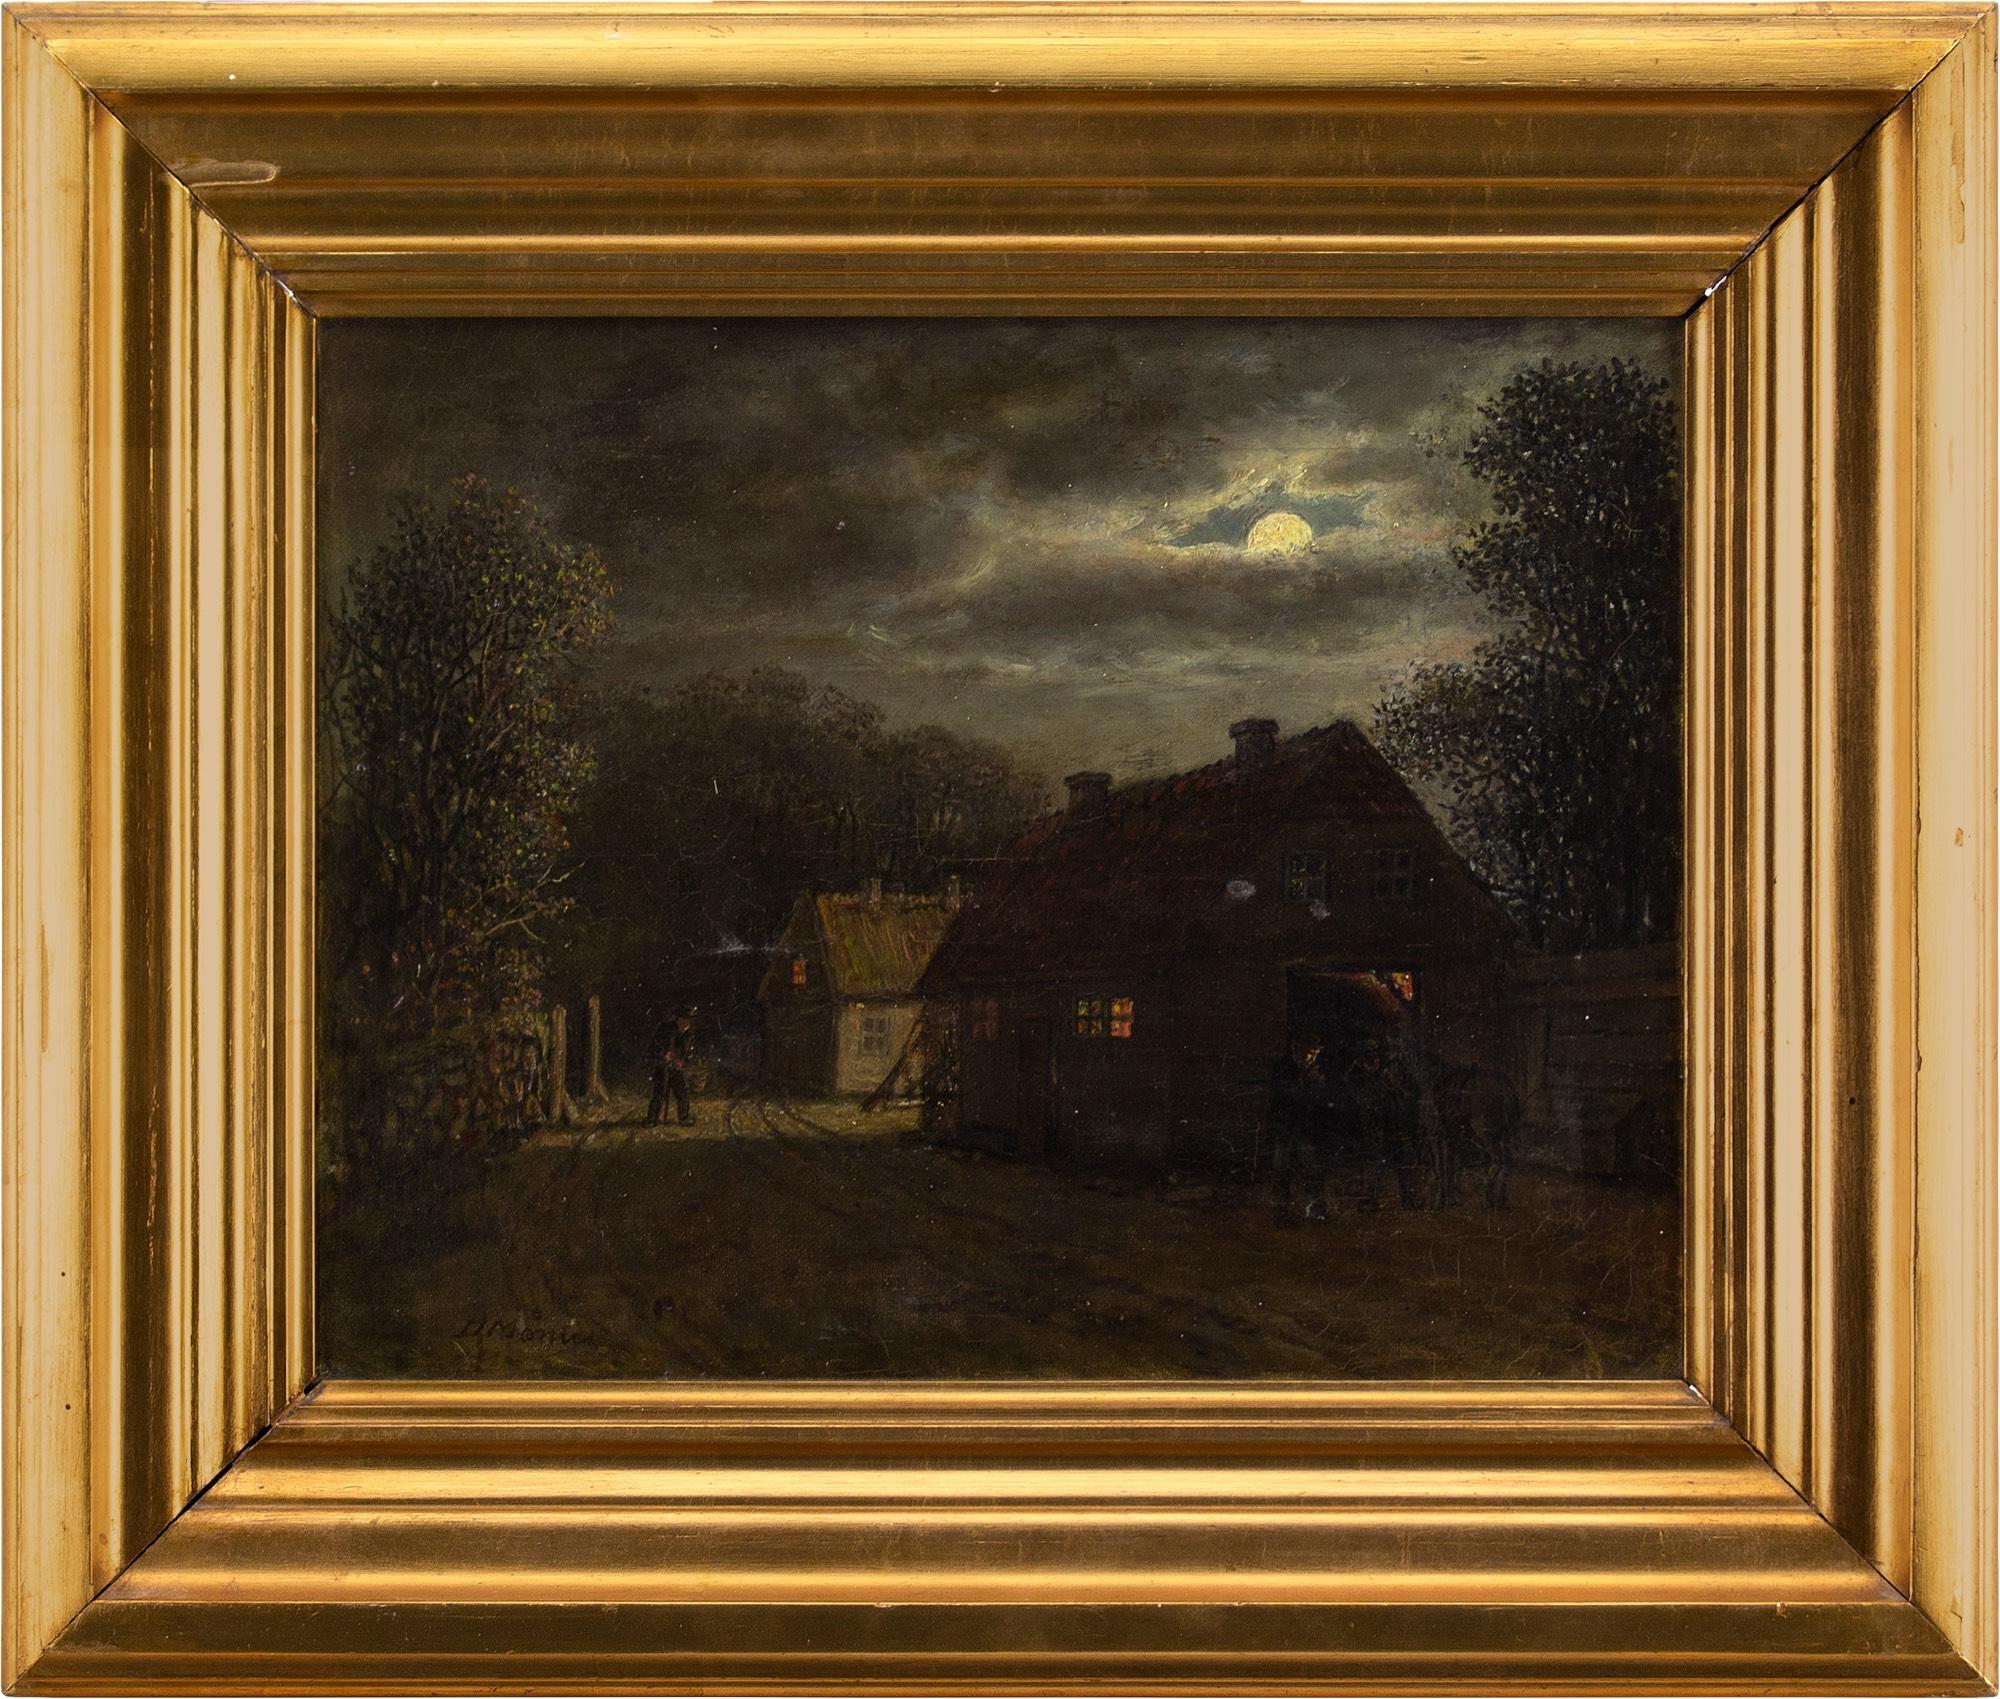 This atmospheric mid-19th-century nocturne by Danish artist David Monies (1812-1894) depicts two cottages under the gentle glow of a partially covered moon. On the right, a man appears to be tending to his horse by an open barn door. While on the